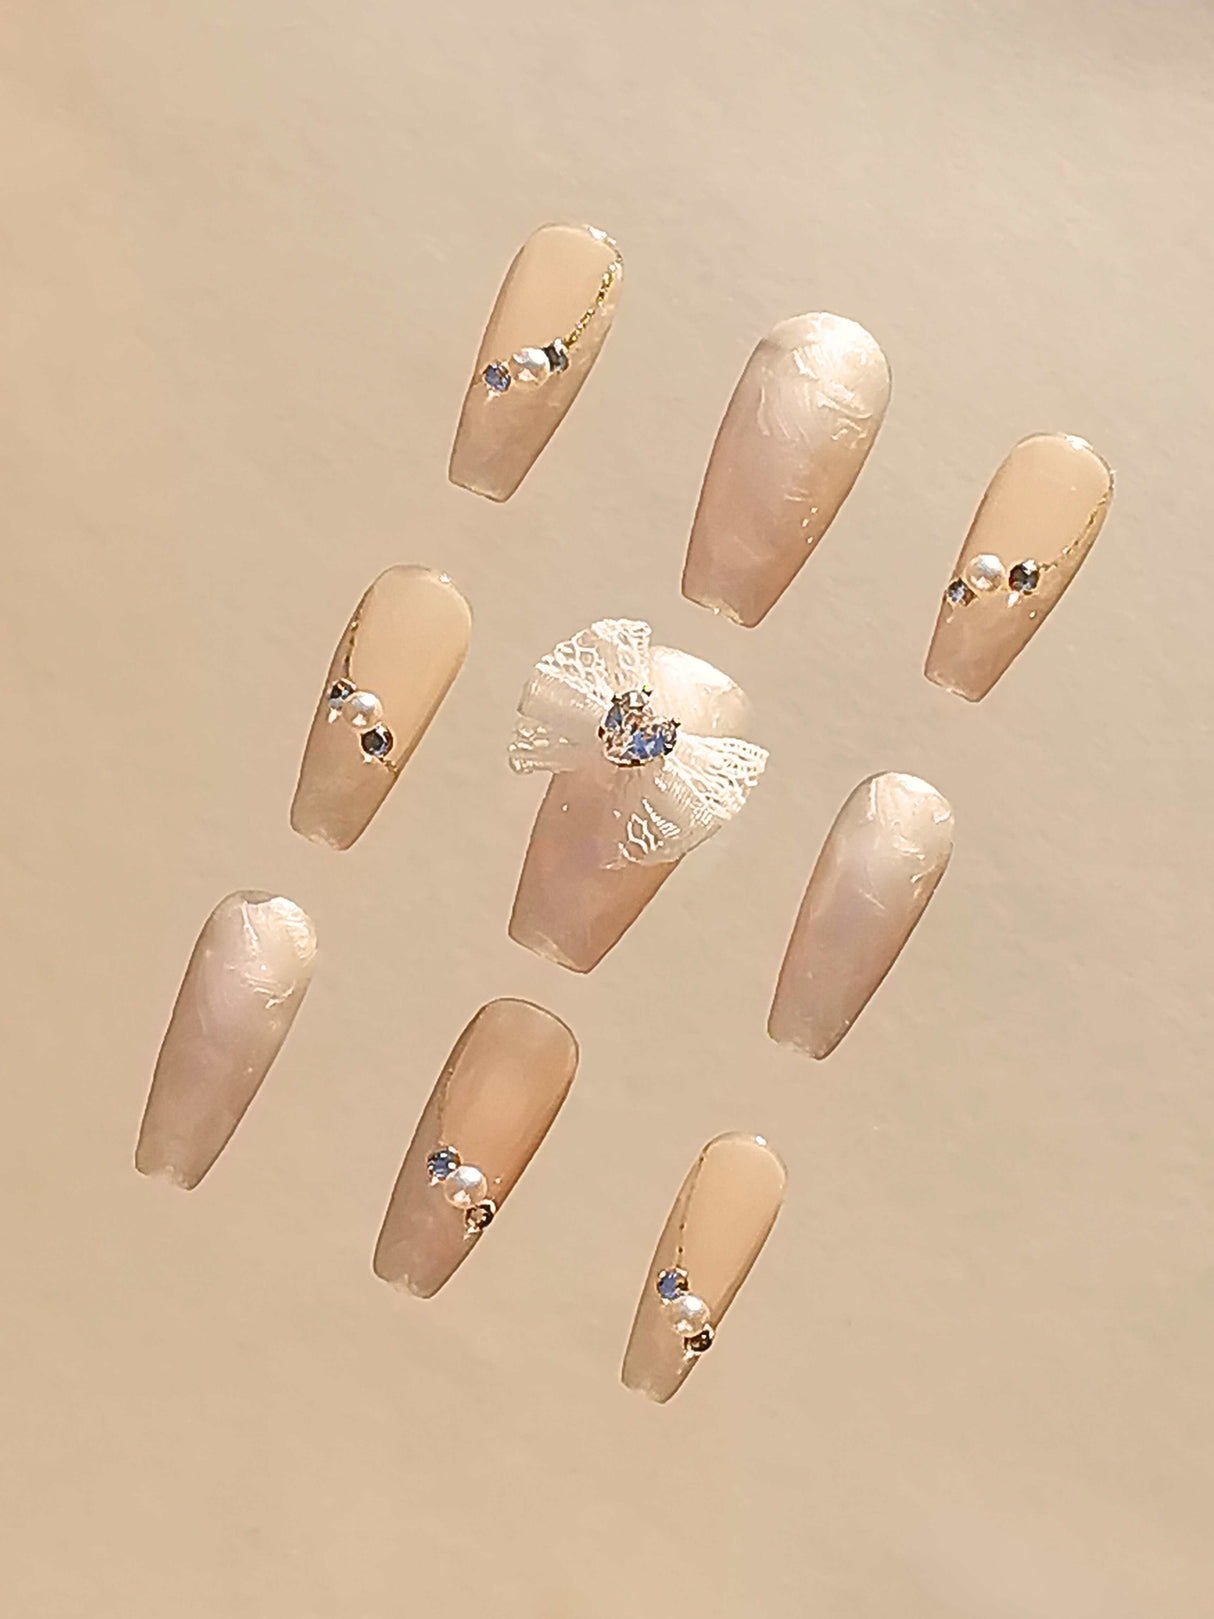 Luxurious nails with a monochromatic color scheme, featuring pearls, rhinestones, geometric patterns, 3D elements, and mixed textures for a high fashion statement.